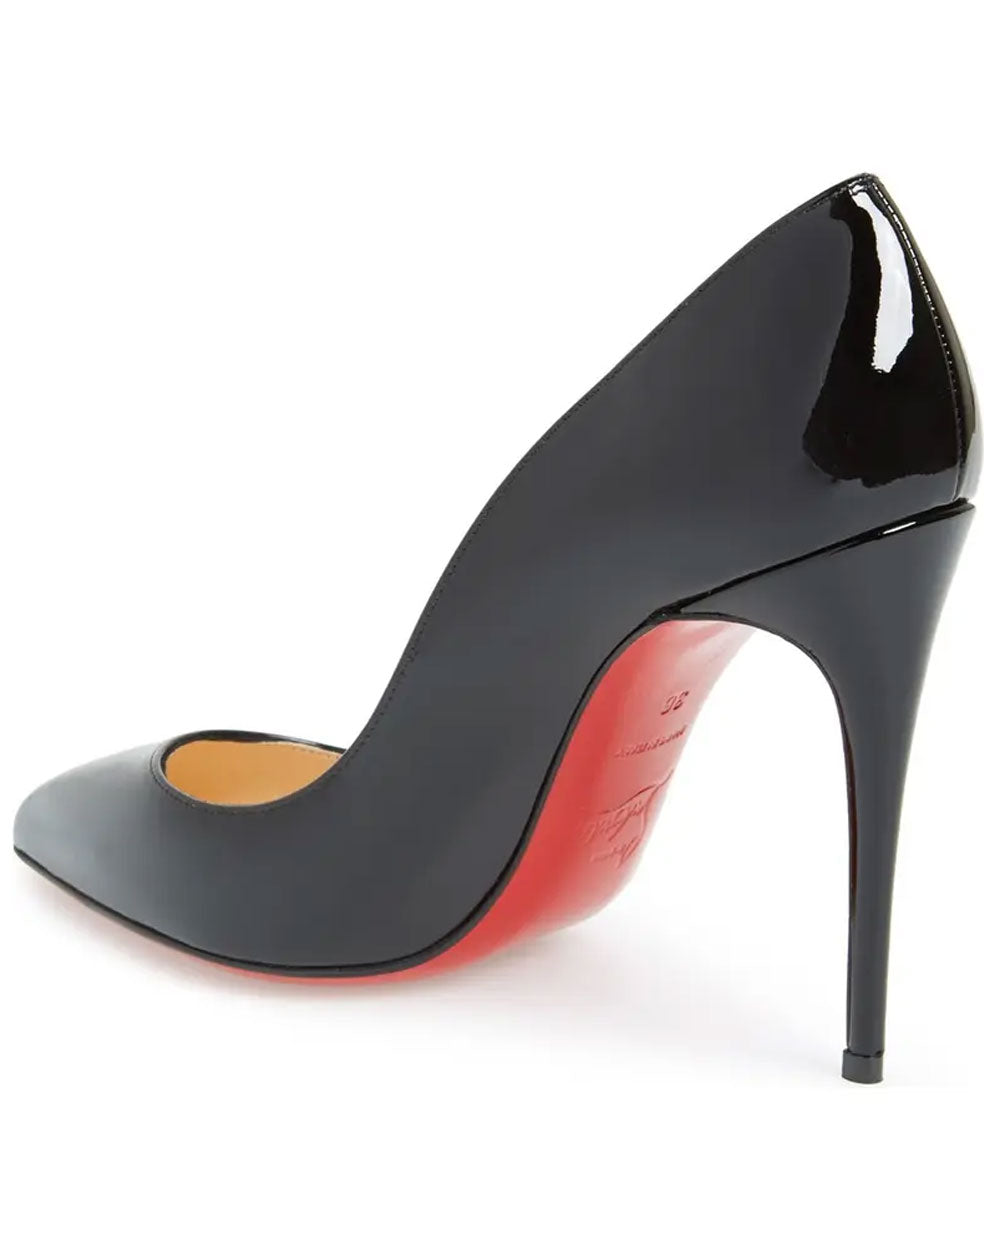 Pigalle Follies 100 Patent Leather Pump in Black